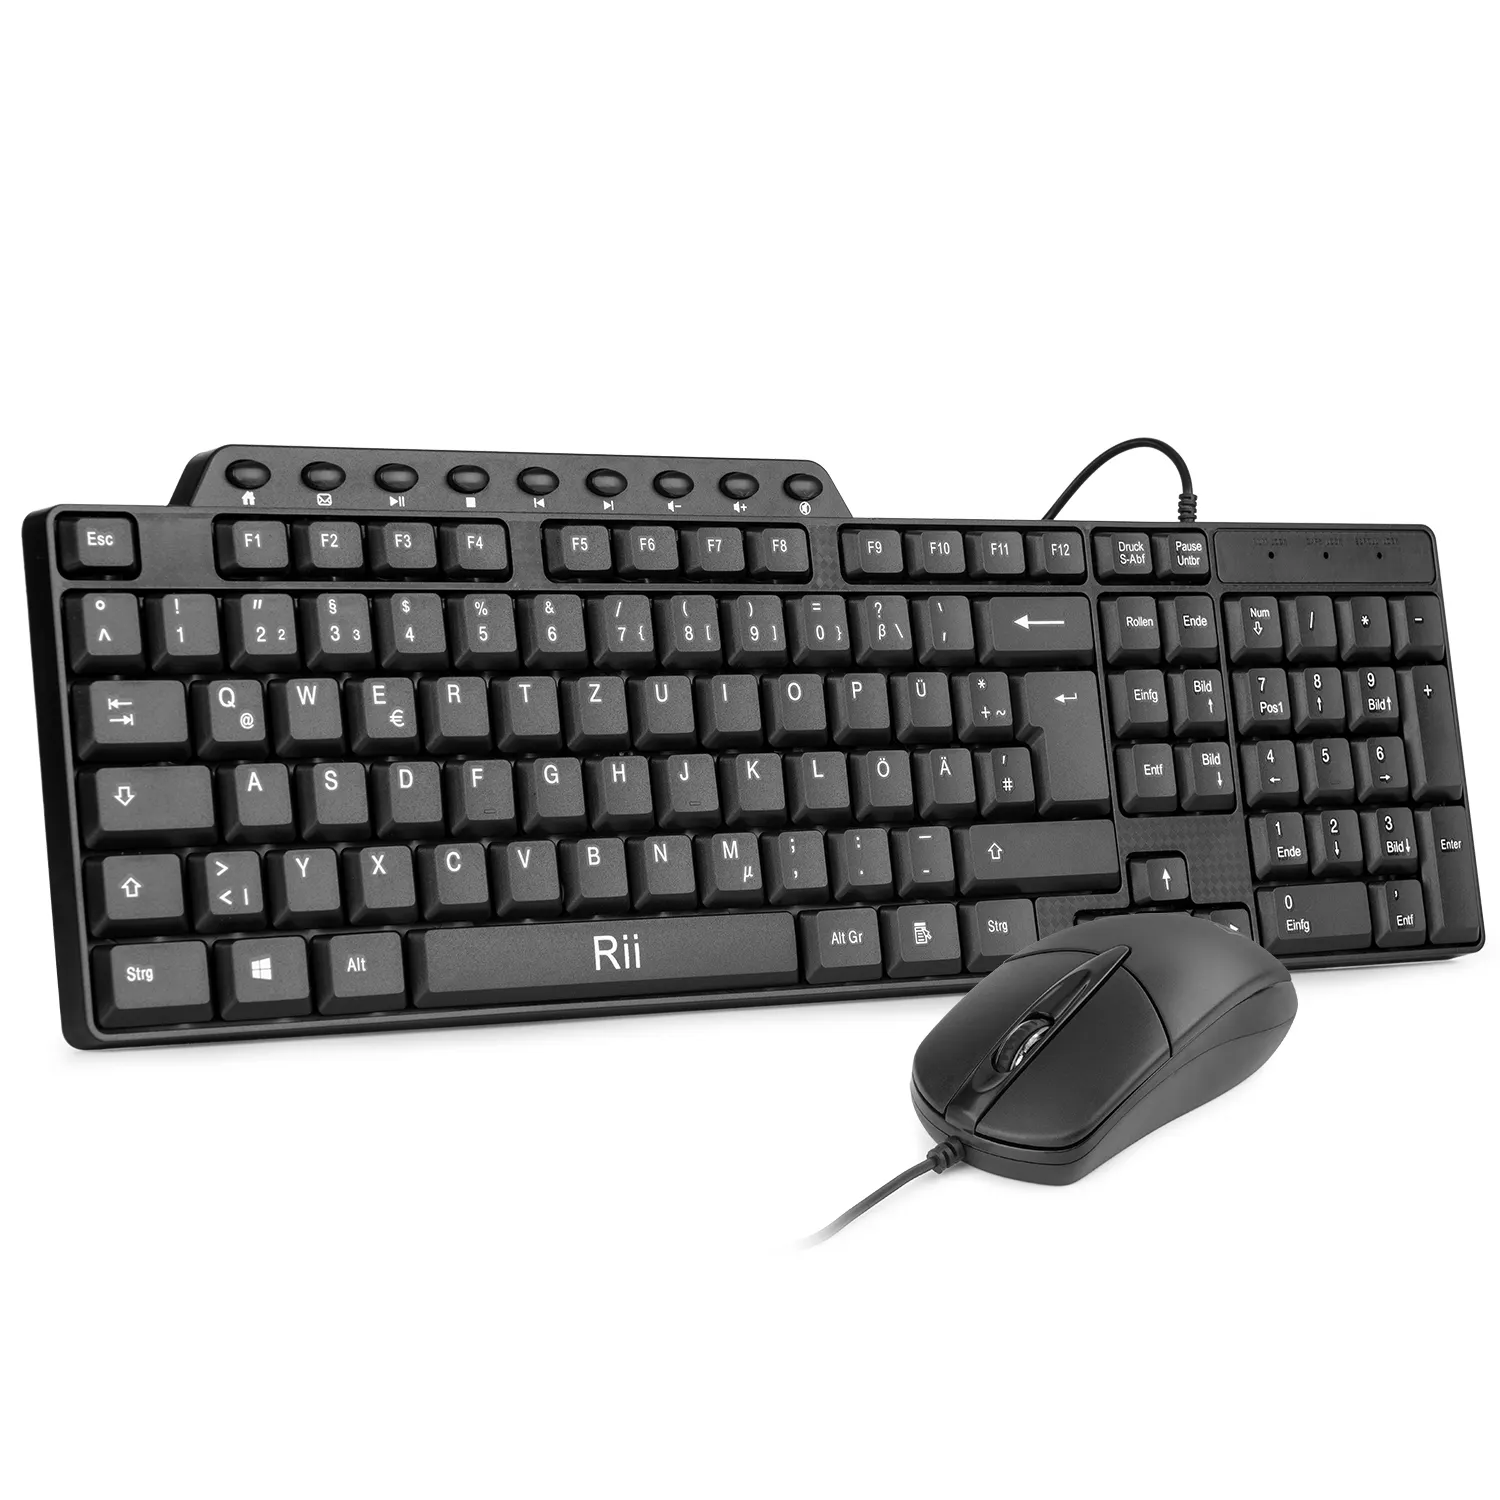 Basic Keyboard and Mouse Rii RK203 Ultra Full Size Slim USB Basic Wired Mouse and Keyboard Combo Set With Number Pad for Compute